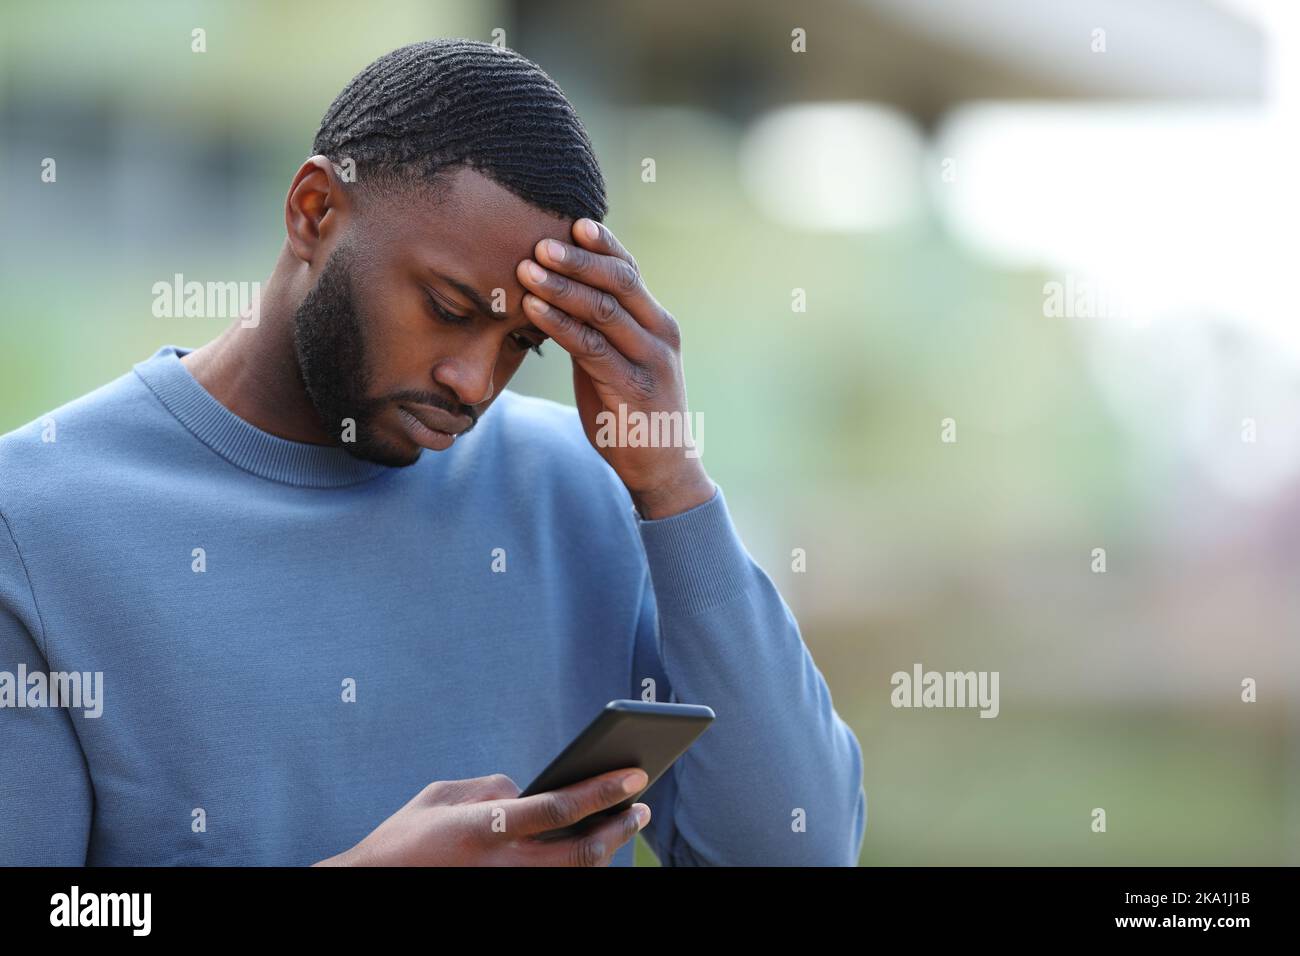 Concerned black man reading bad news on smart phone in the street Stock Photo